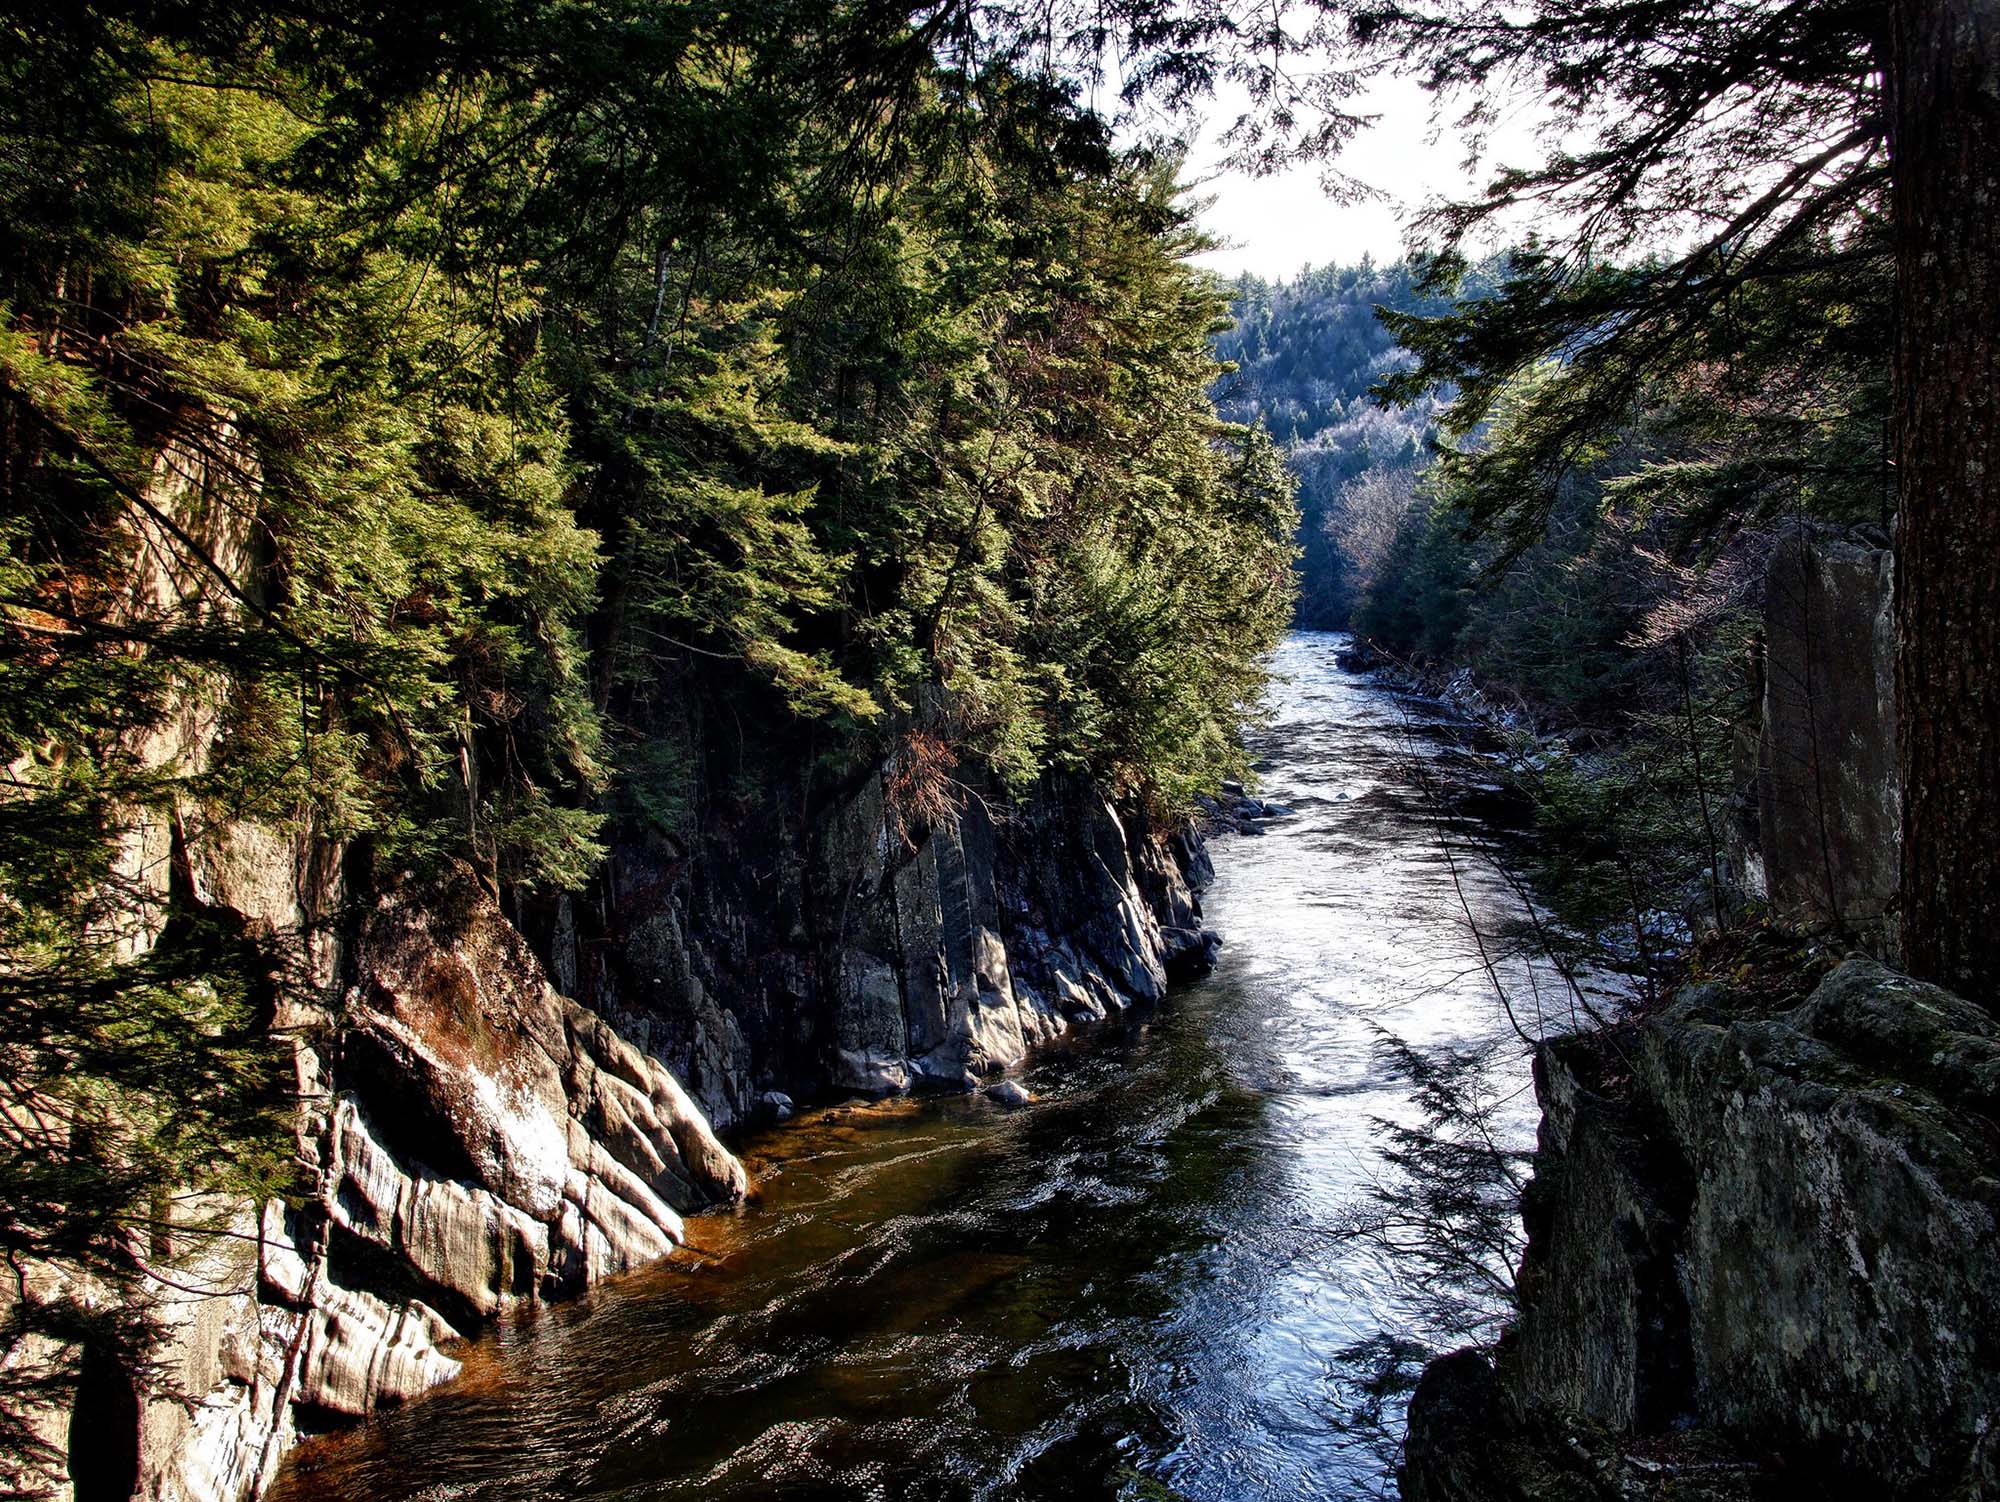 Phot of the woods and gorge in Chesterfield, Massachusetts